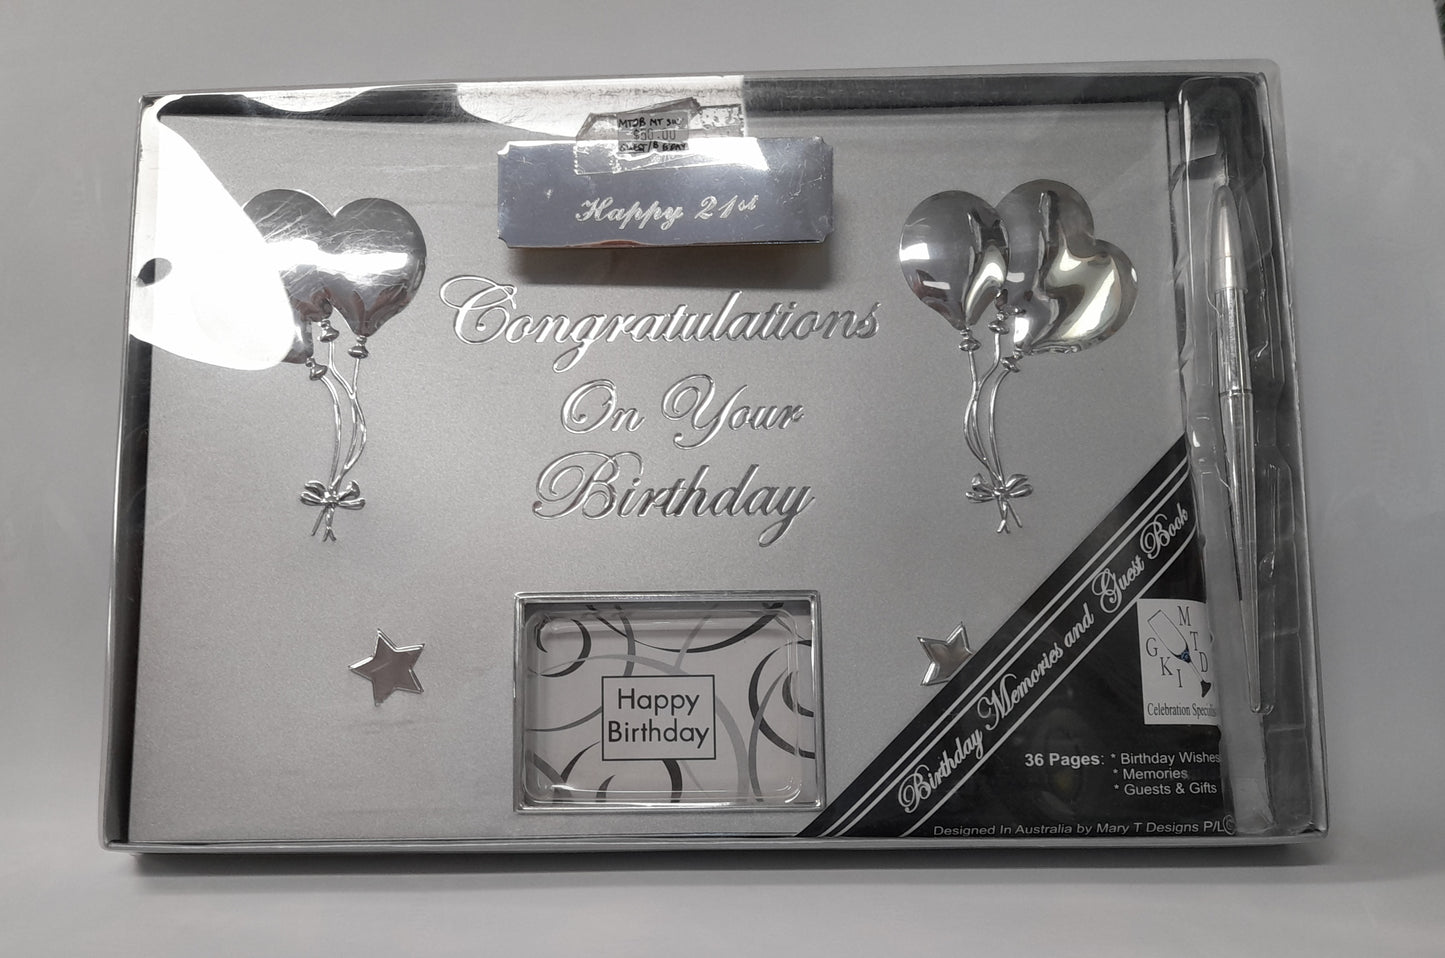 Birthday Guest Book - Congratulations On Your Birthday